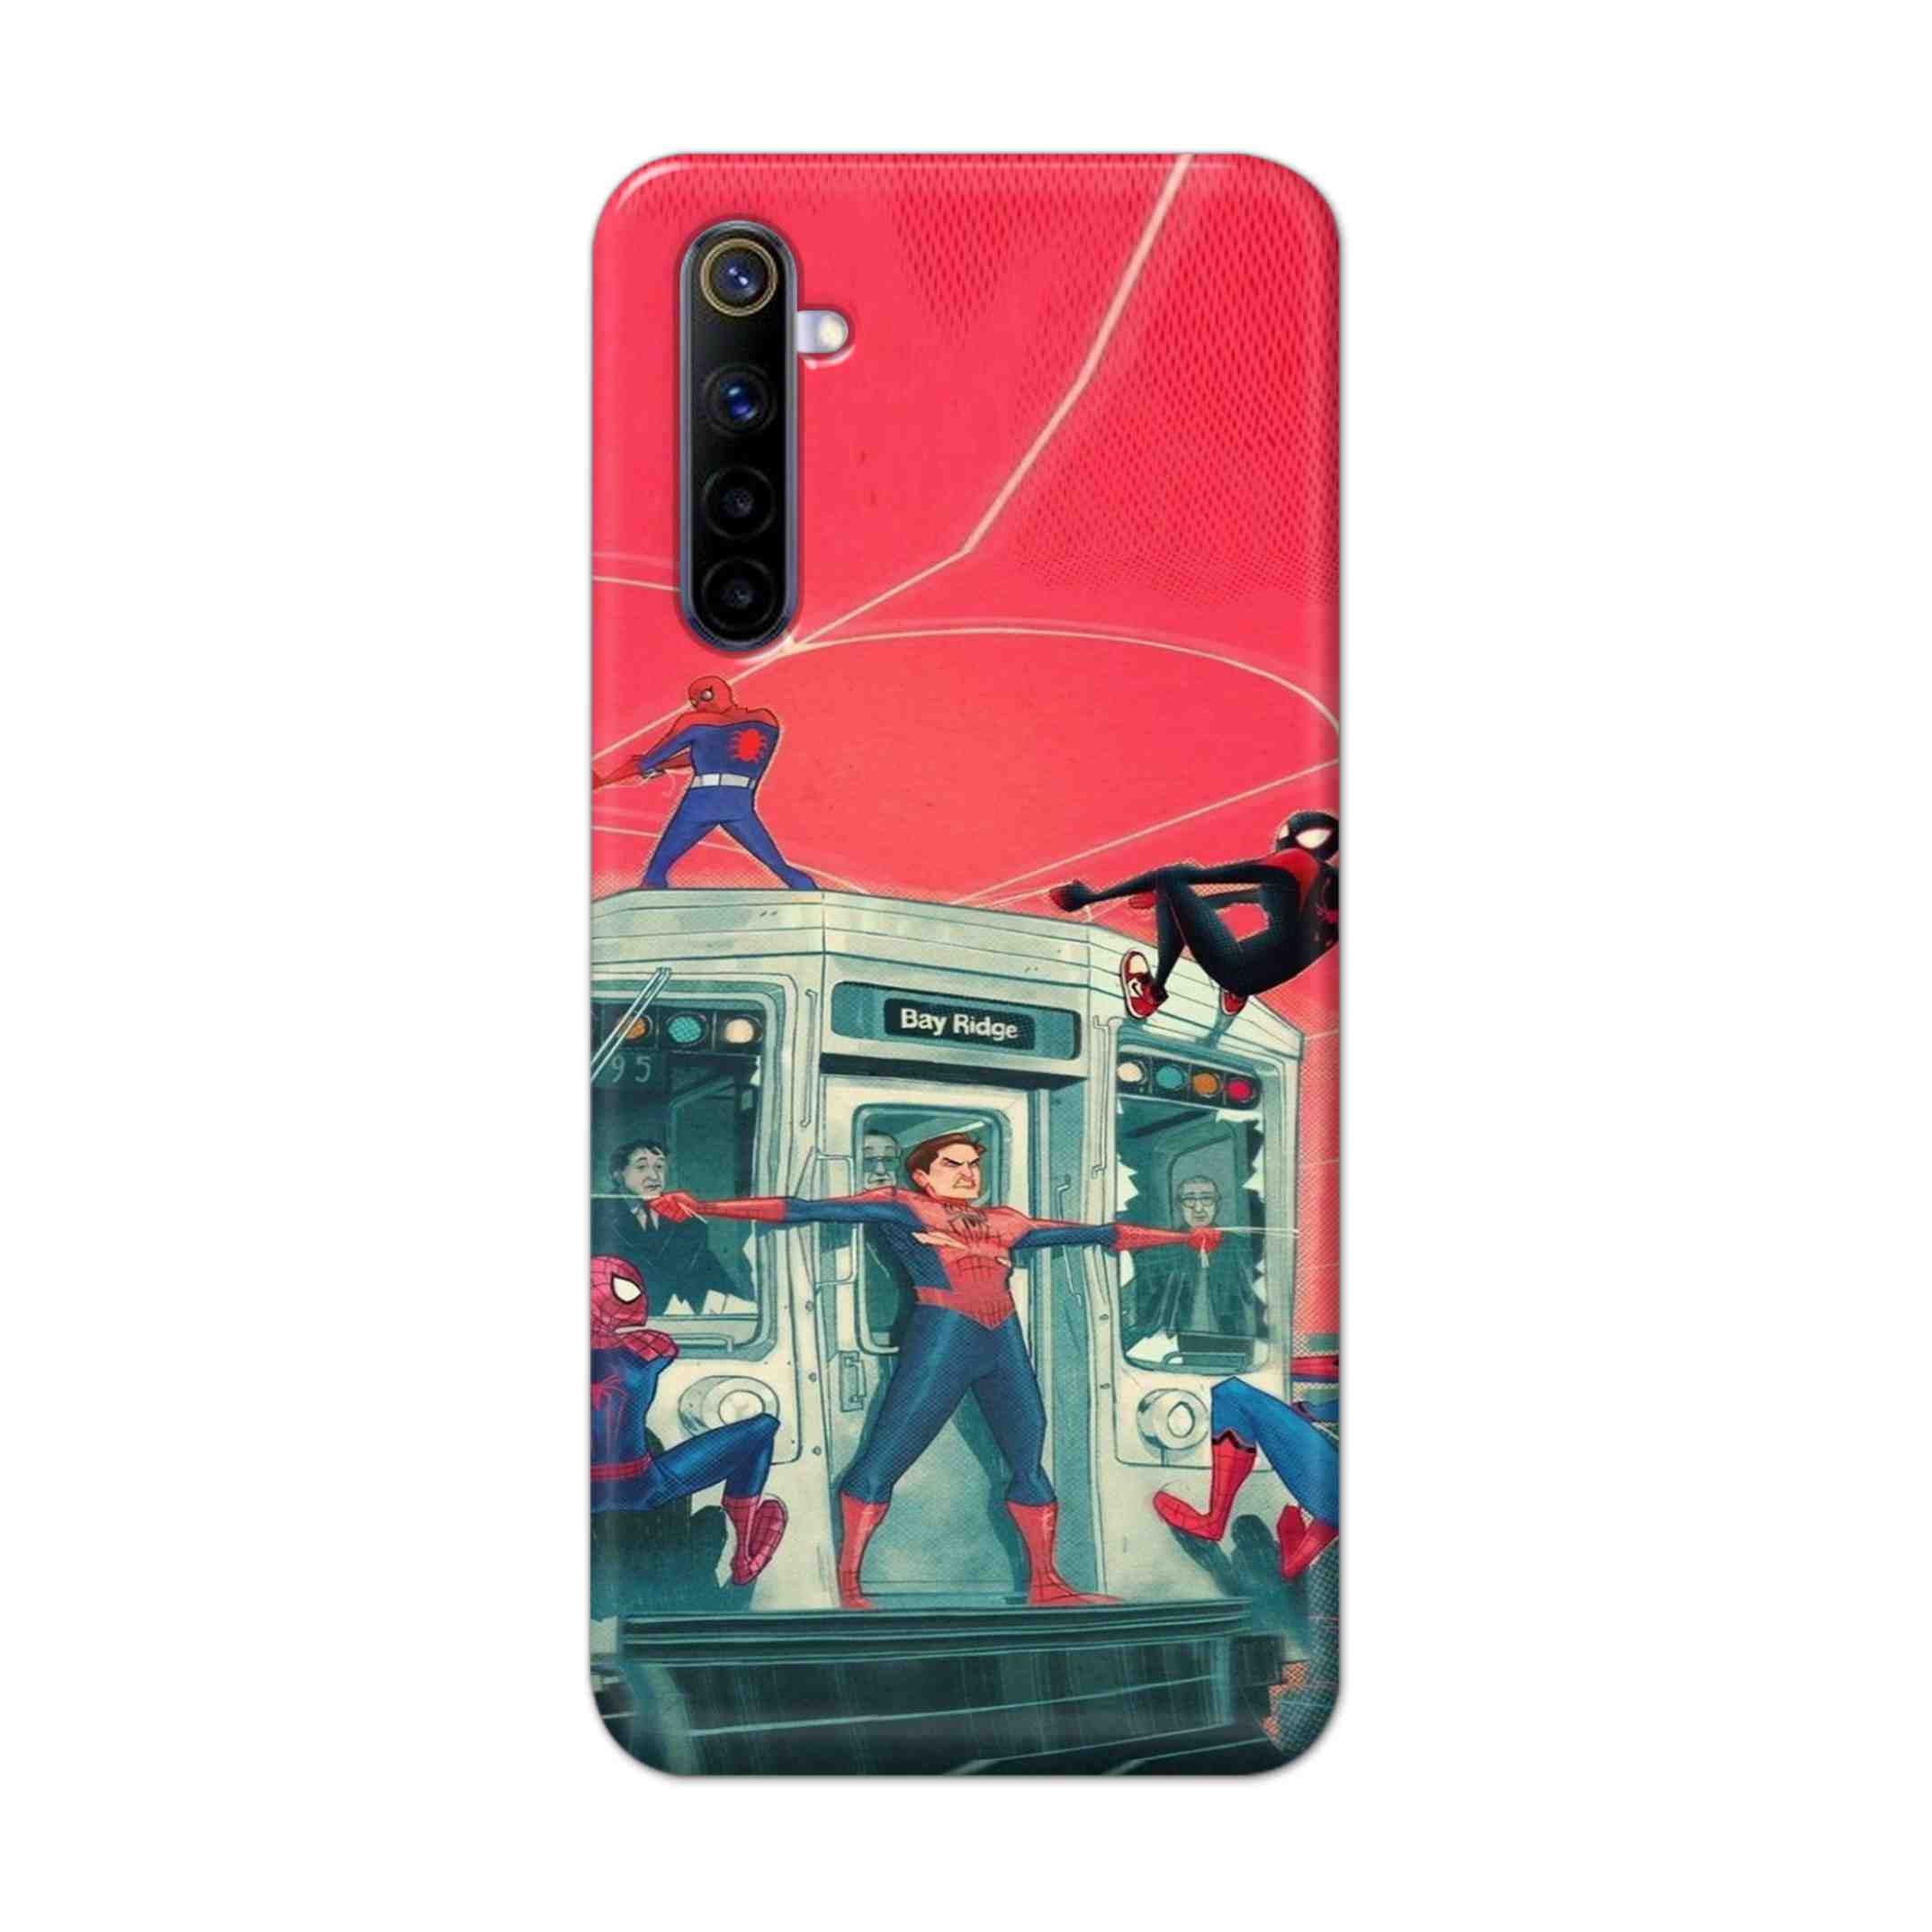 Buy All Spiderman Hard Back Mobile Phone Case Cover For REALME 6 PRO Online